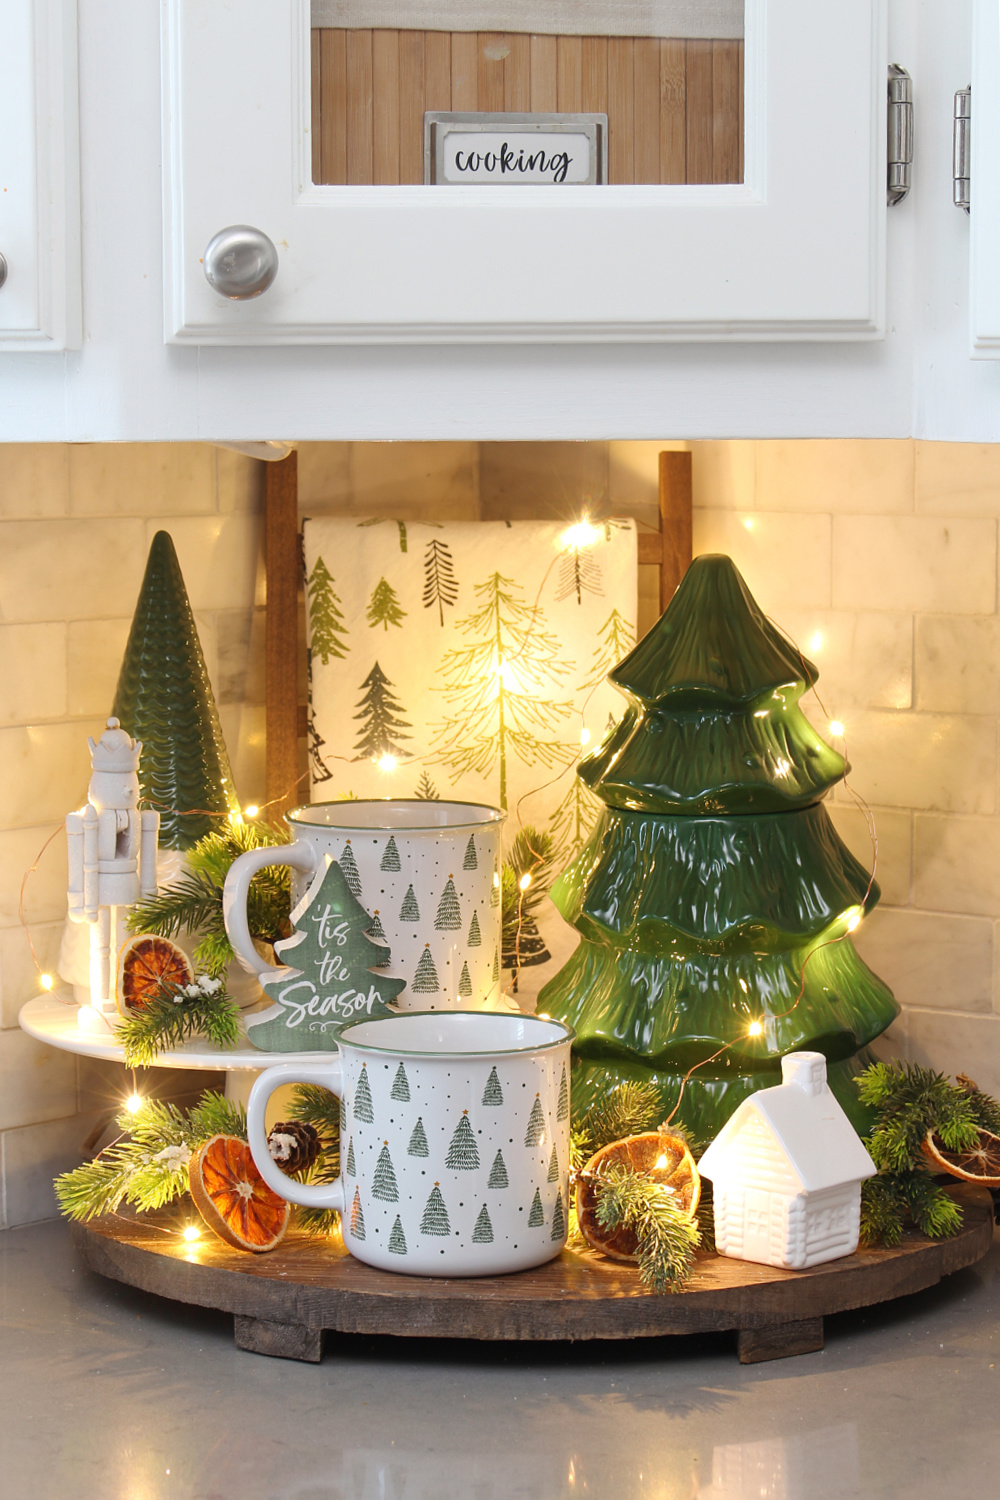 A white and green Christmas vignette with a tree in the kitchen.